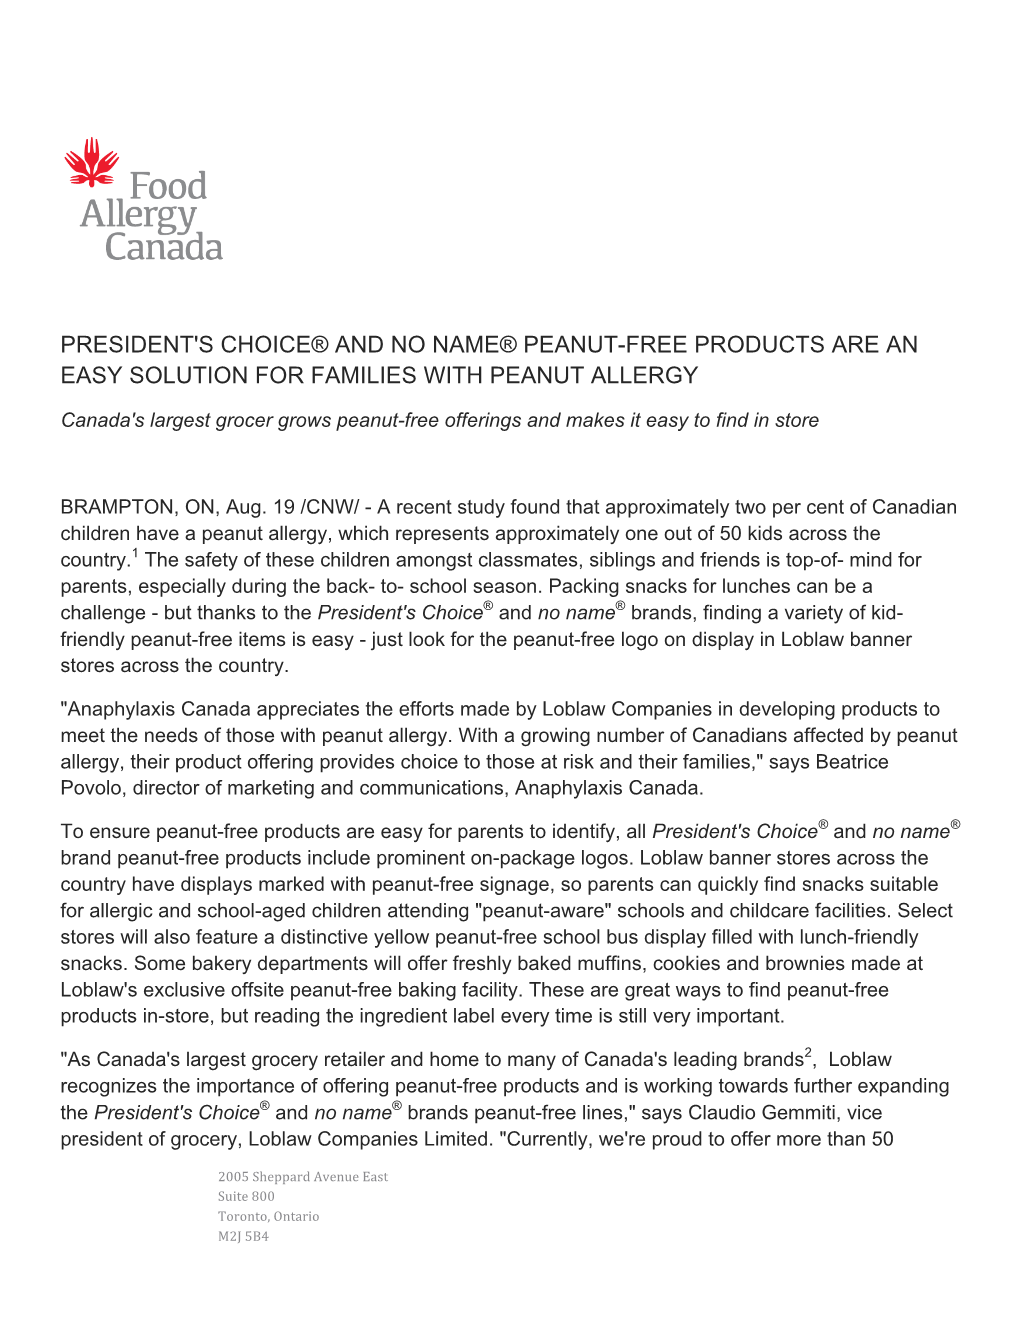 President's Choice® and No Name® Peanut-Free Products Are an Easy Solution for Families with Peanut Allergy